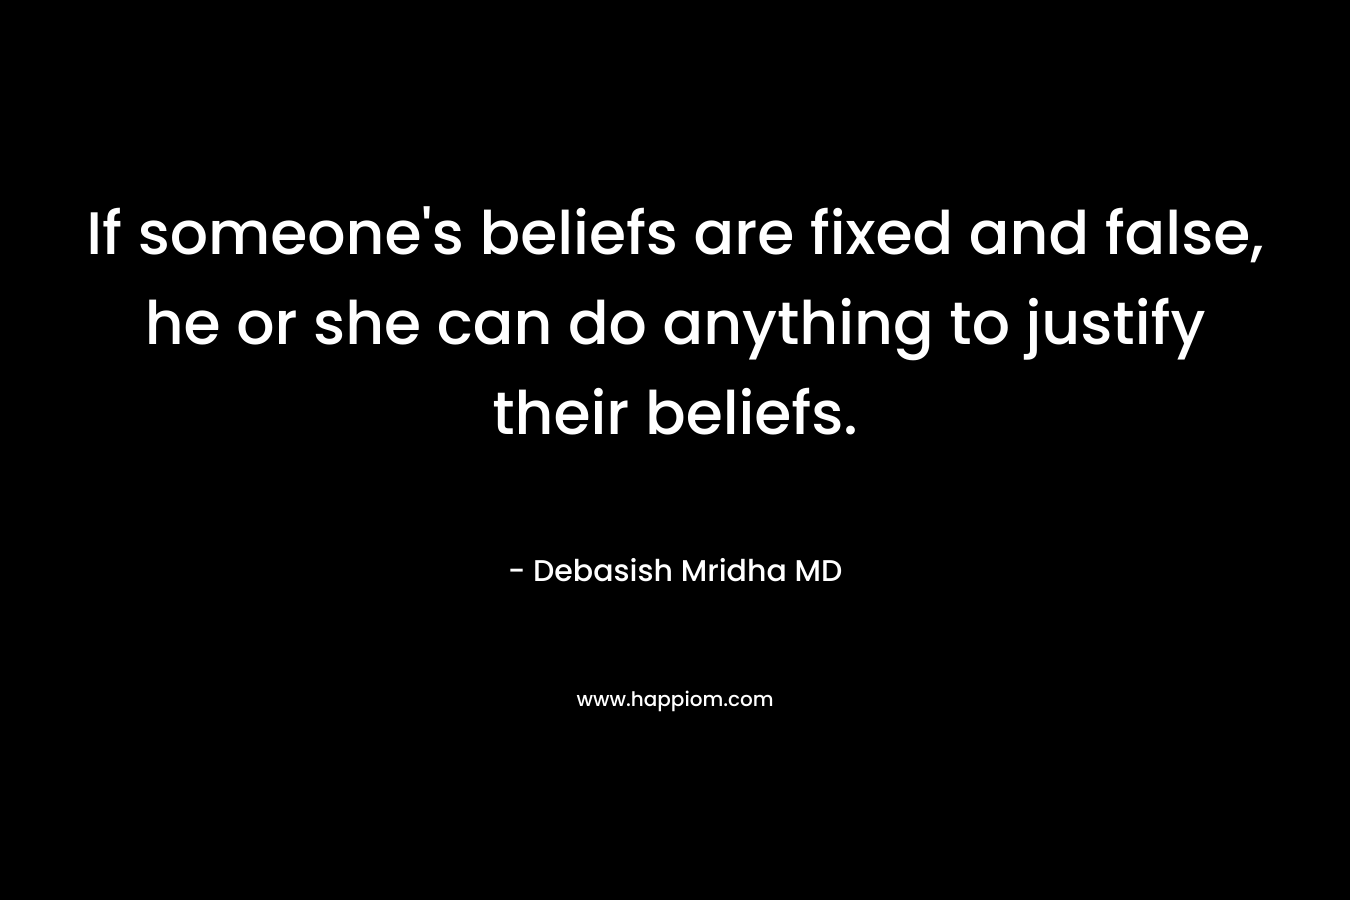 If someone's beliefs are fixed and false, he or she can do anything to justify their beliefs.